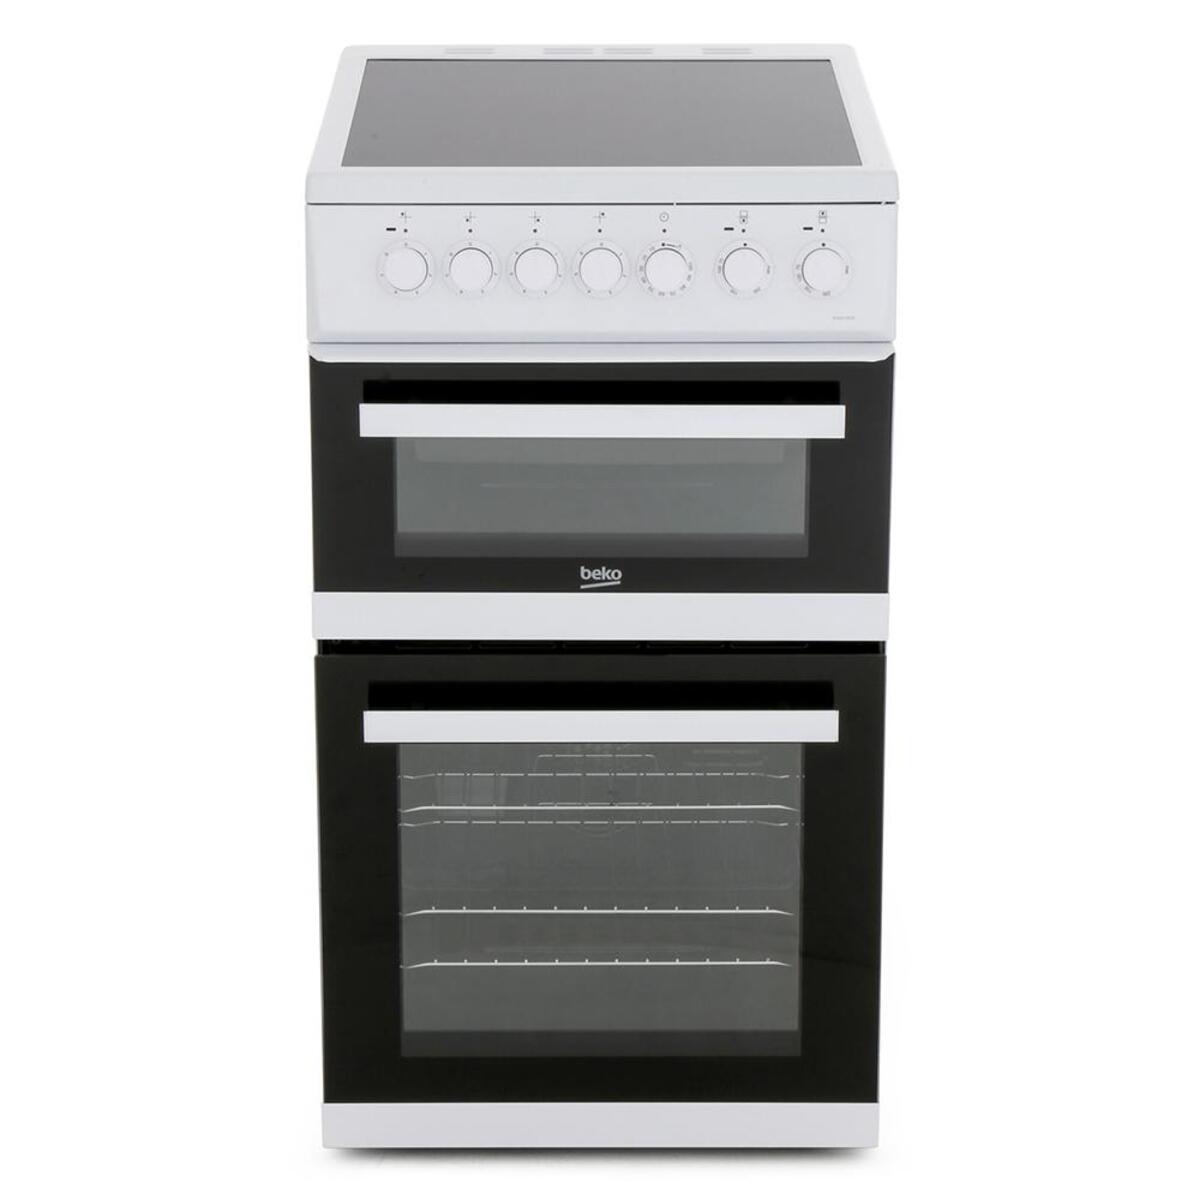 Beko EDVC503W 50cm Electric Cooker with Double Oven, White